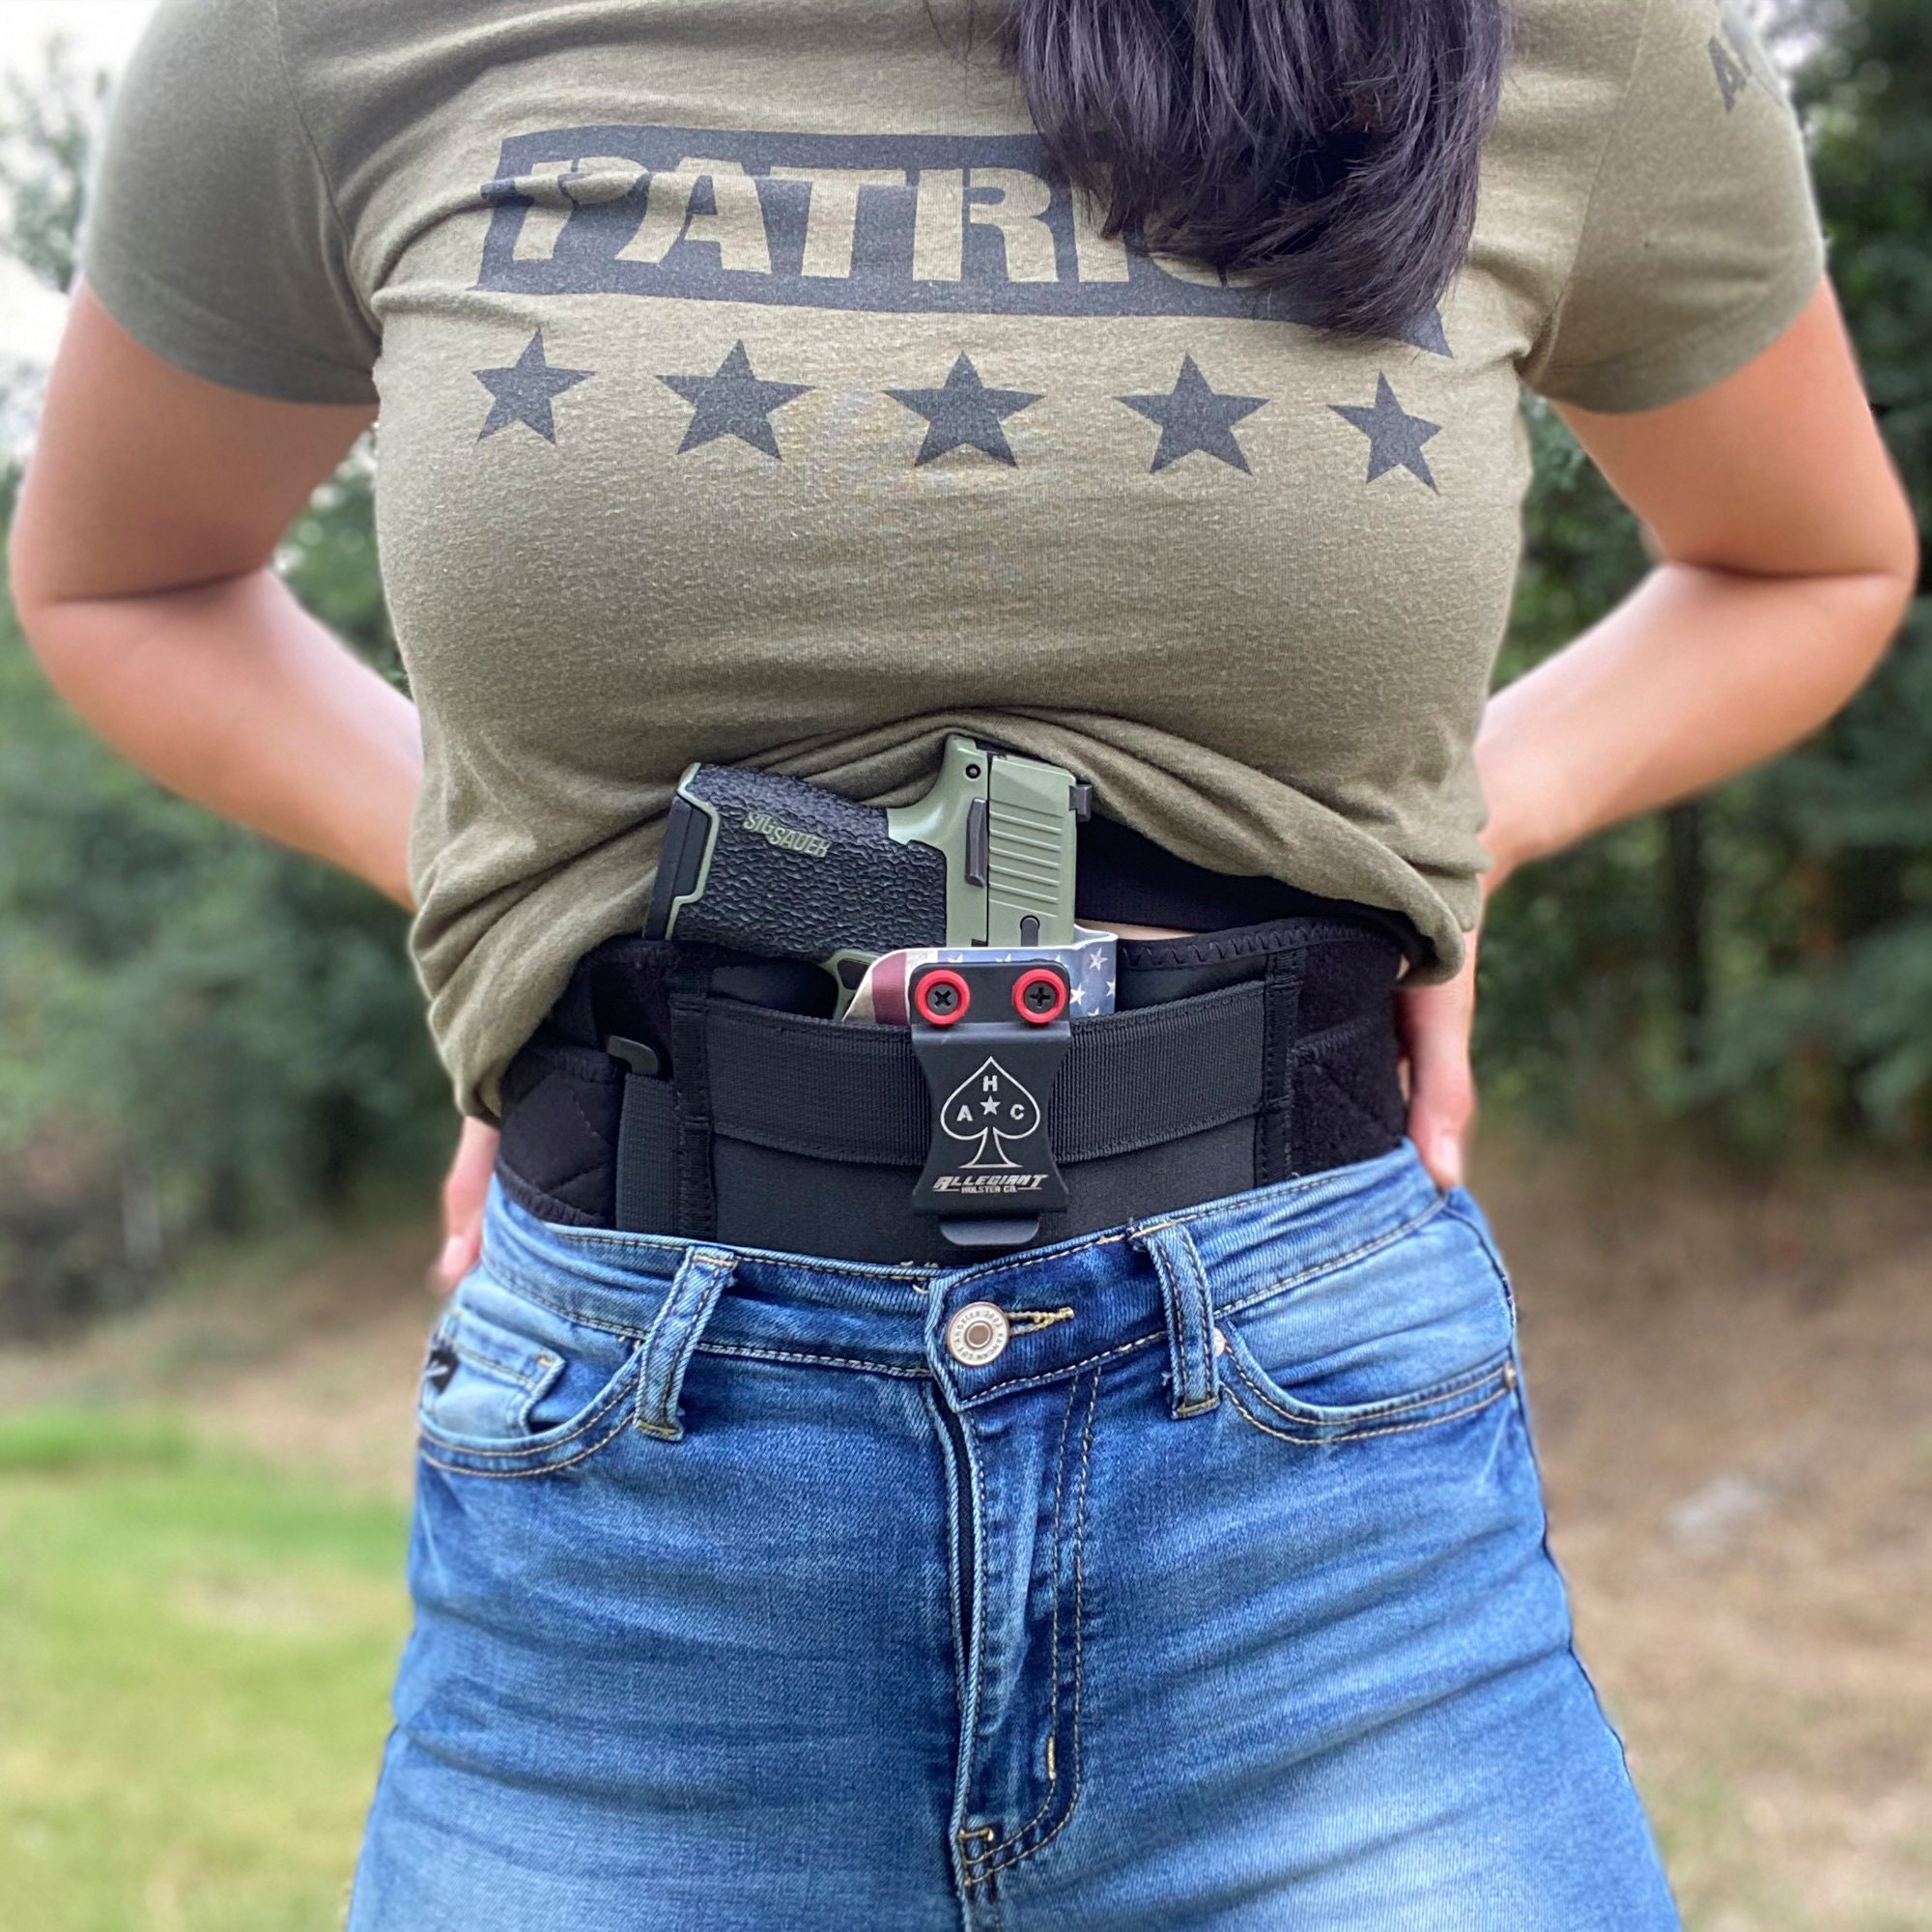 Concealed Carry Belly Band 